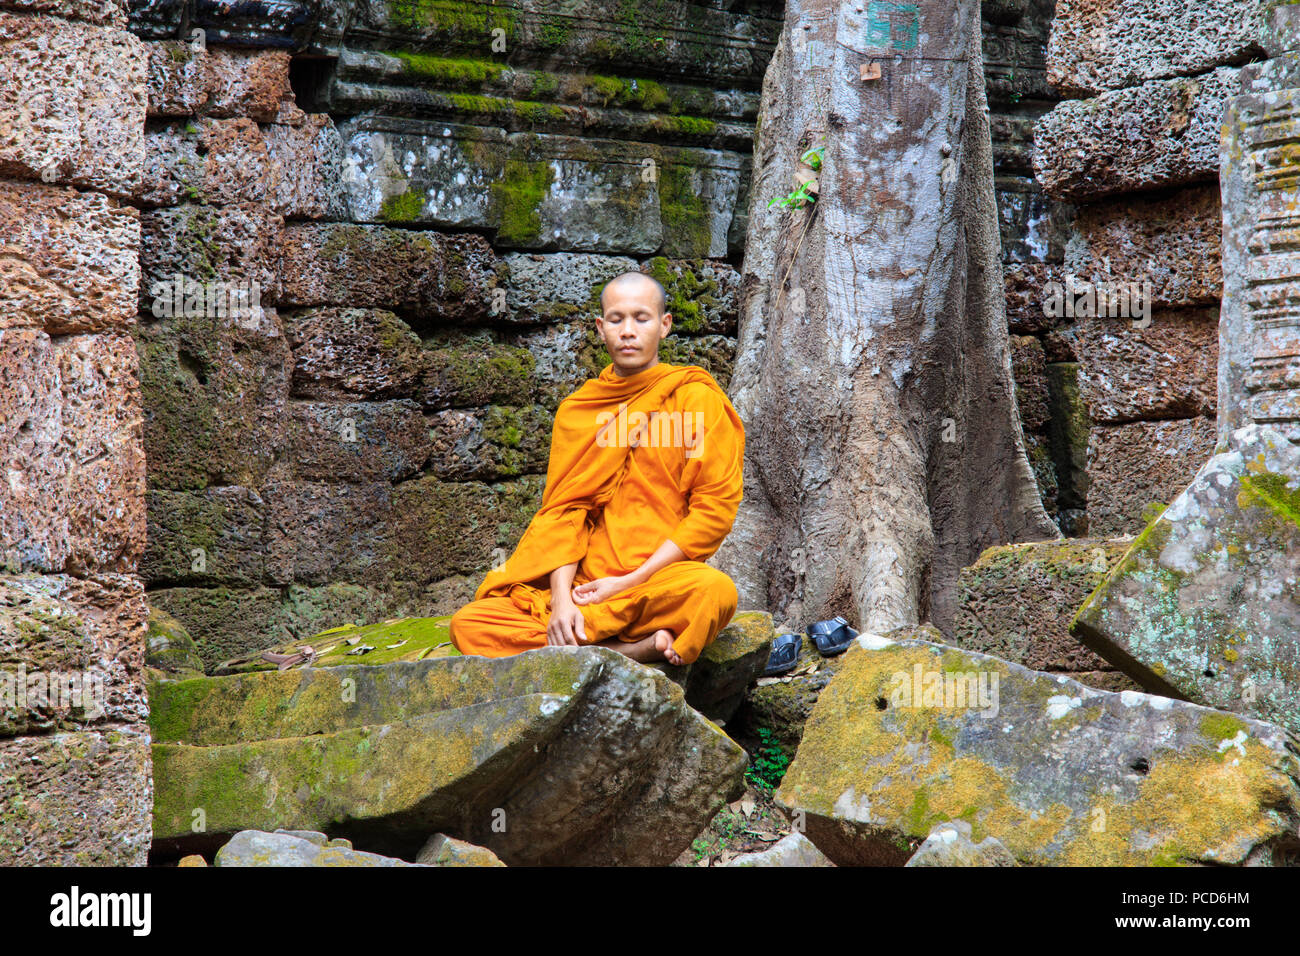 Buddhist monk sitting in a ruined temple in Angkor, UNESCO World Heritage Site, Siem Reap, Cambodia, Indochina, Southeast Asia, Asia Stock Photo